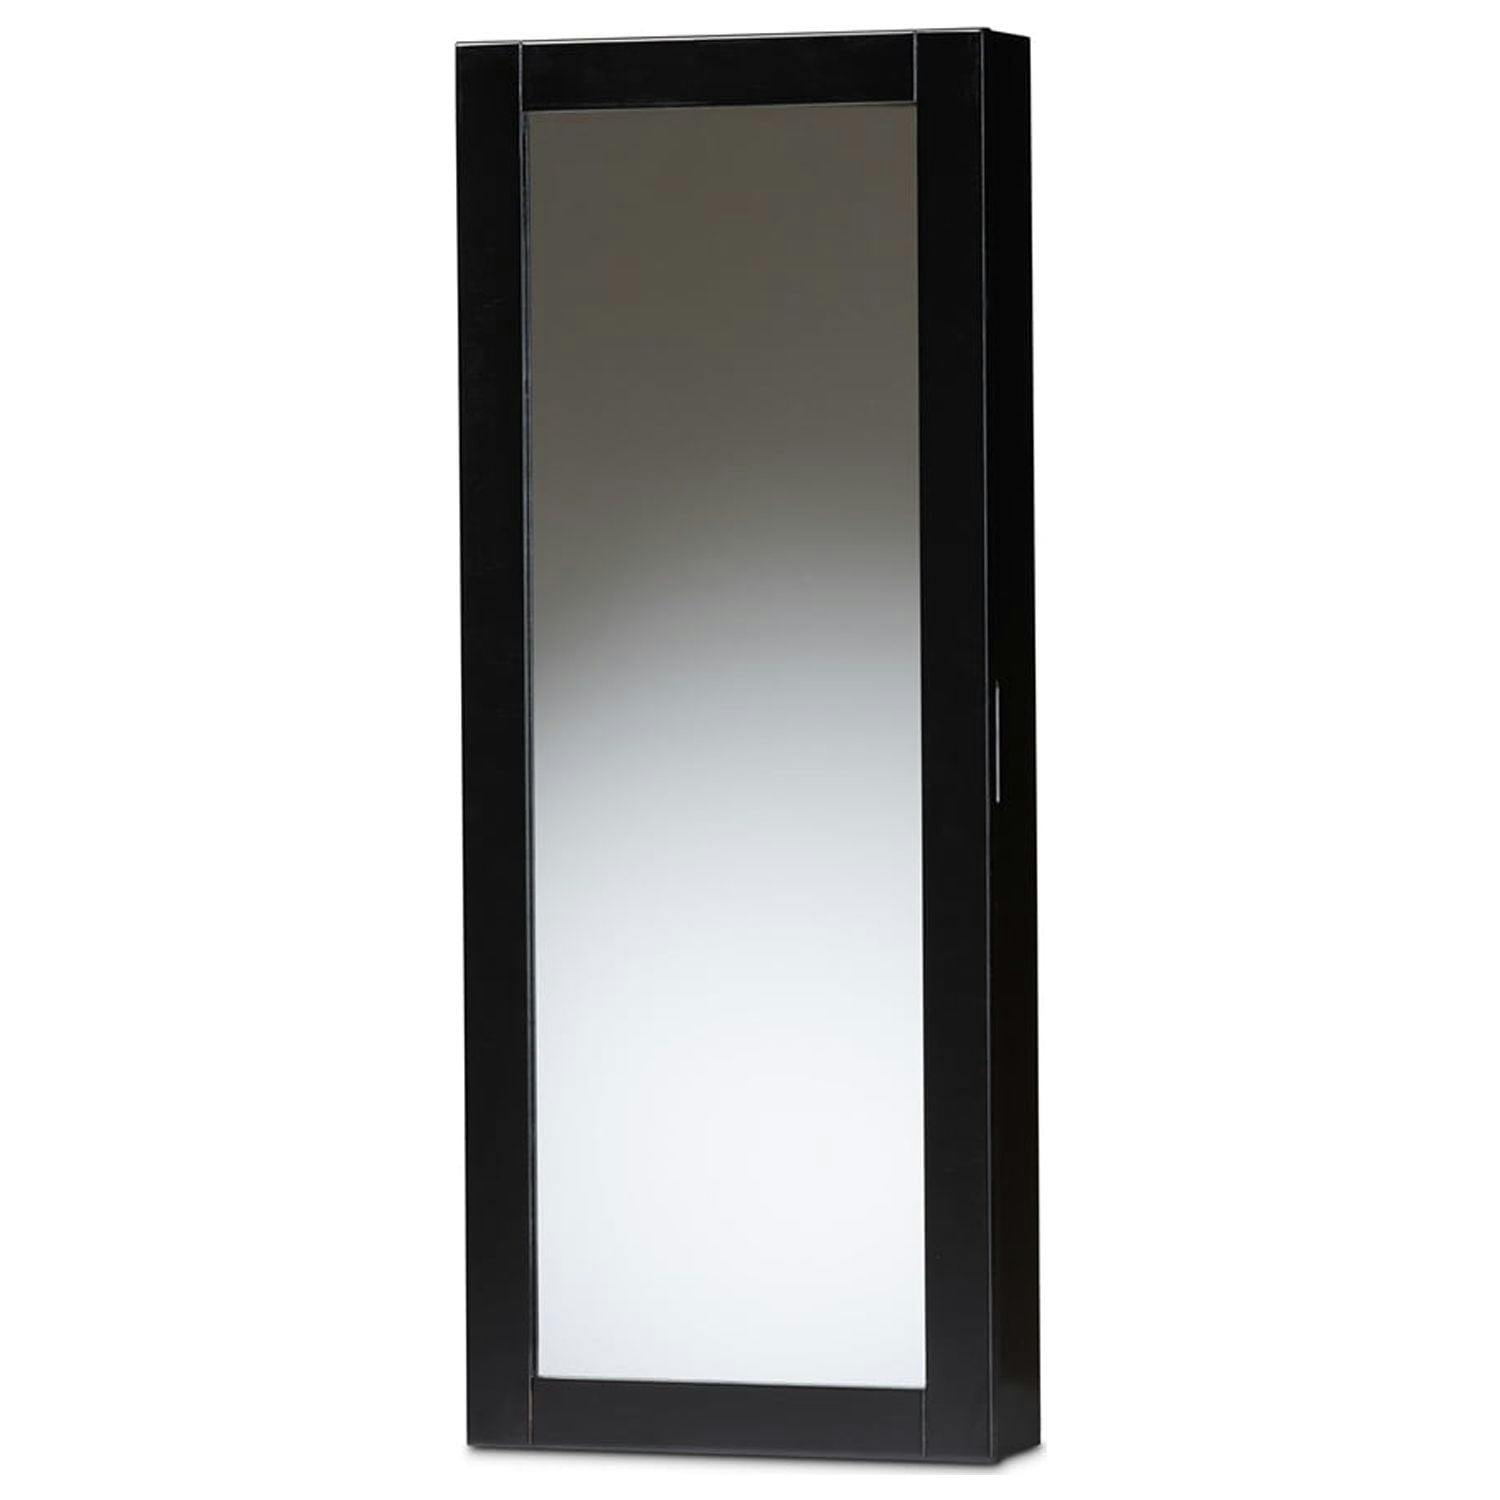 Contemporary Black Wall-Mounted Jewelry Armoire with Full-Length Mirror